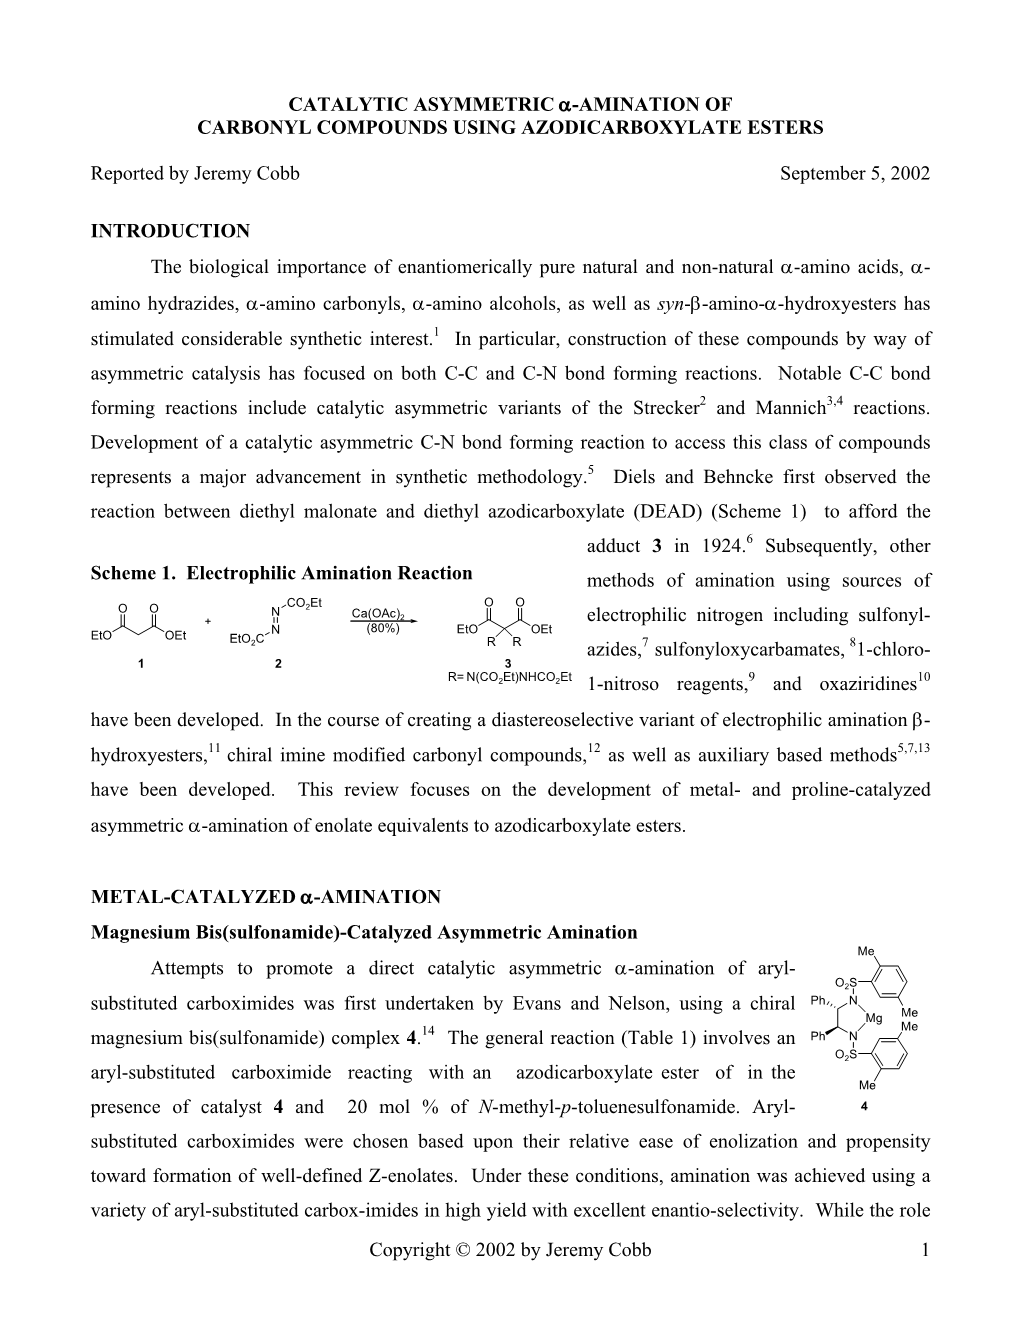 Catalytic Asymmetric Α-Amination of Carbonyl Compounds Using Azodicarboxylate Esters